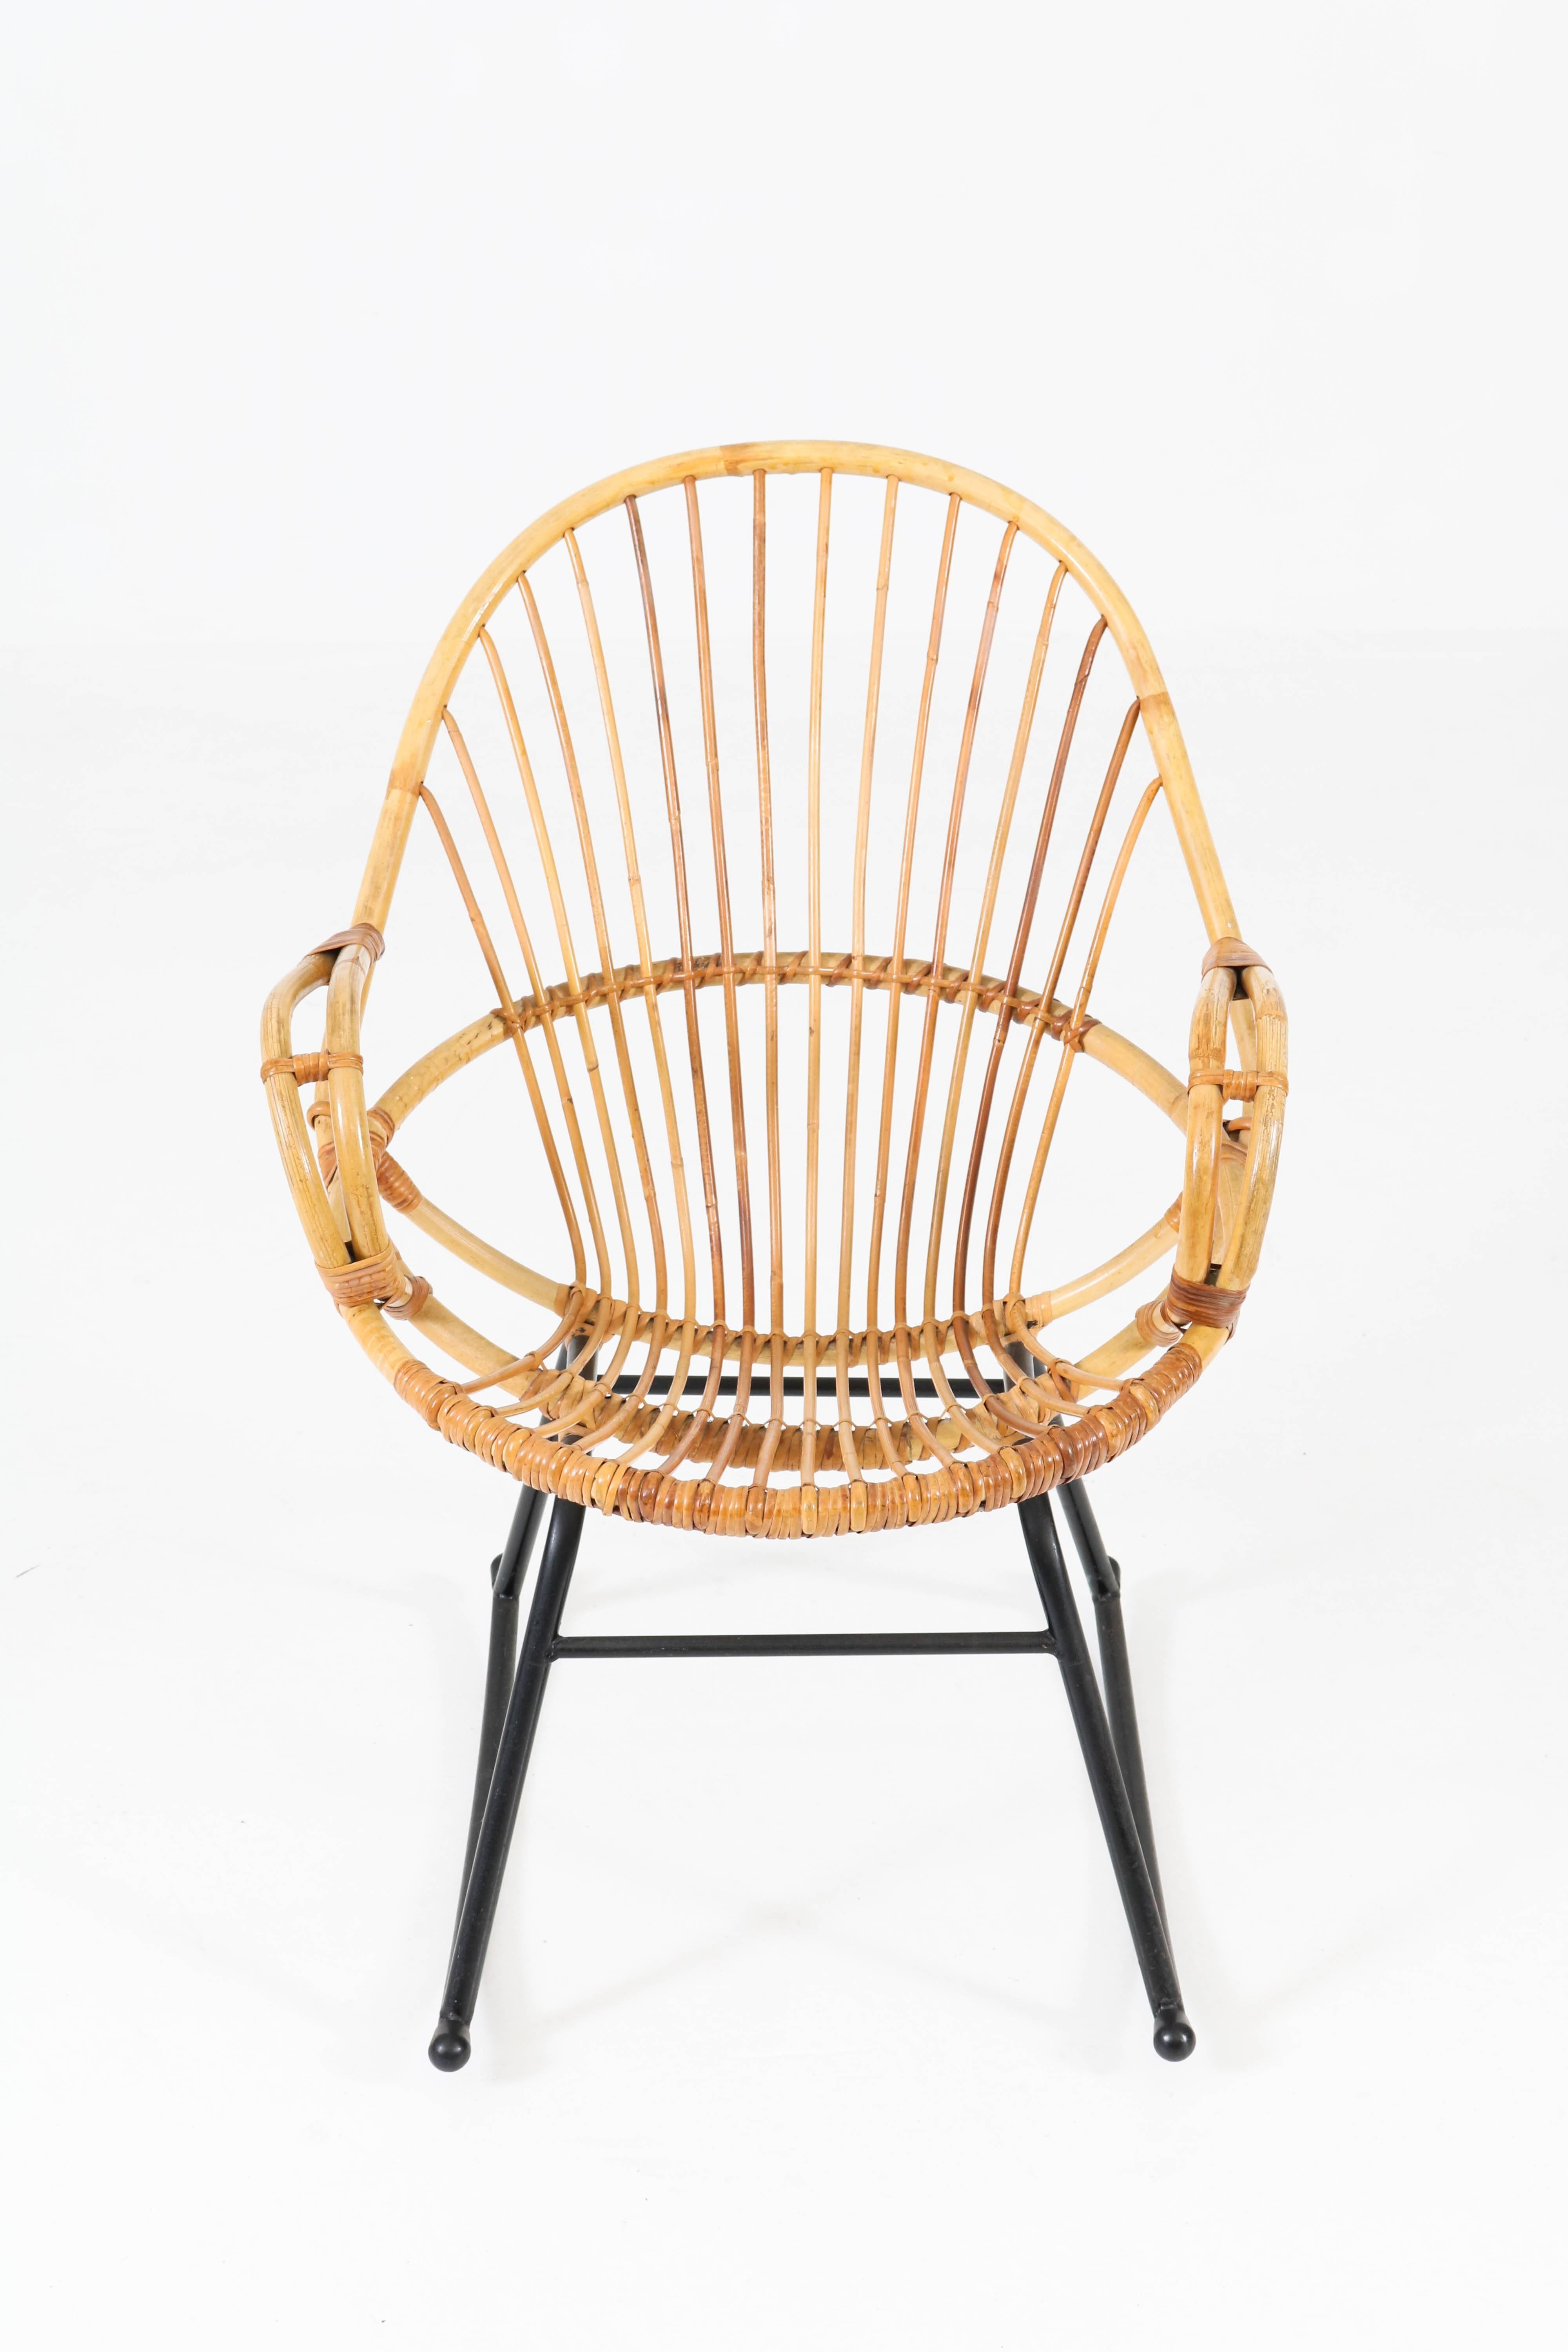 Elegant Mid-Century Modern rattan rocking chair by Gebroeders Jonker for Rohe, 1960s.
Black lacquered metal base with rattan seating.
In good original condition with minor wear consistent with age and use,
preserving a beautiful patina.